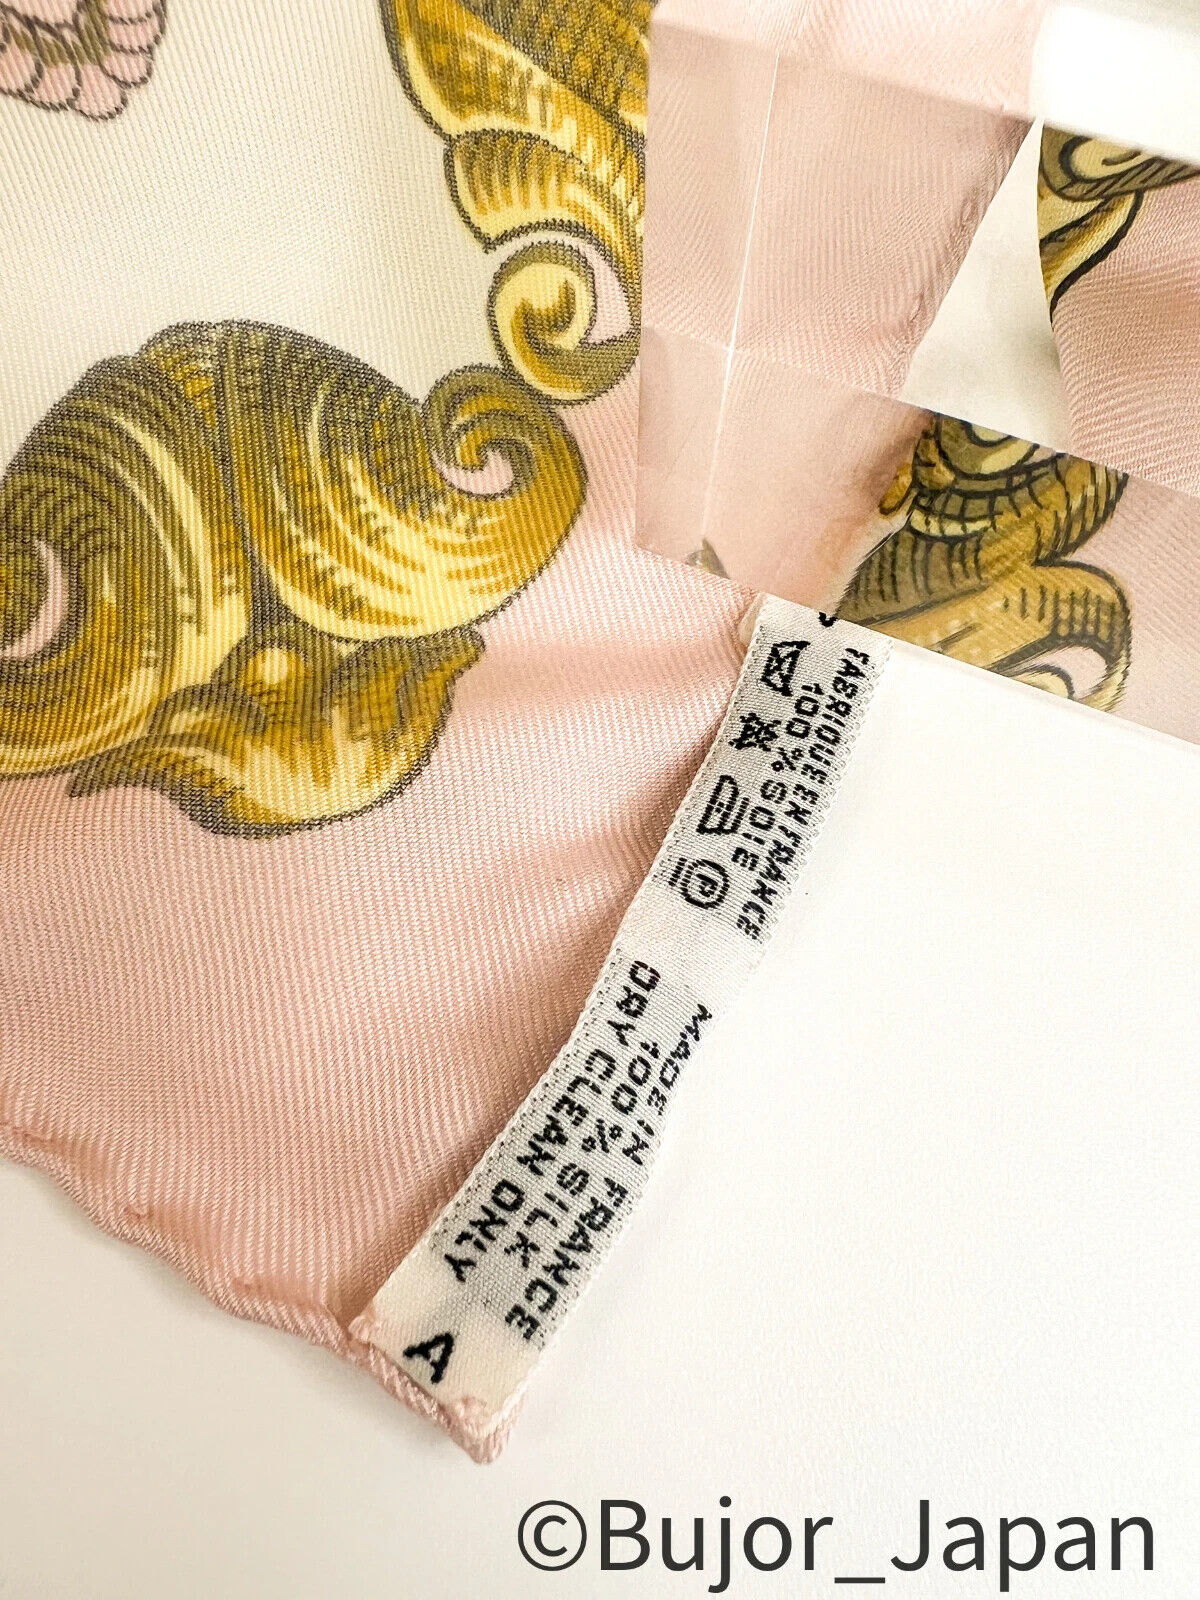 HERMES Scarf Carre90 Pink "lvdovicvs mangnvs" Silk 100% Mint made in France, Hemers silk scarf vintage, Scarf 90cm, Bag Accessories Gift